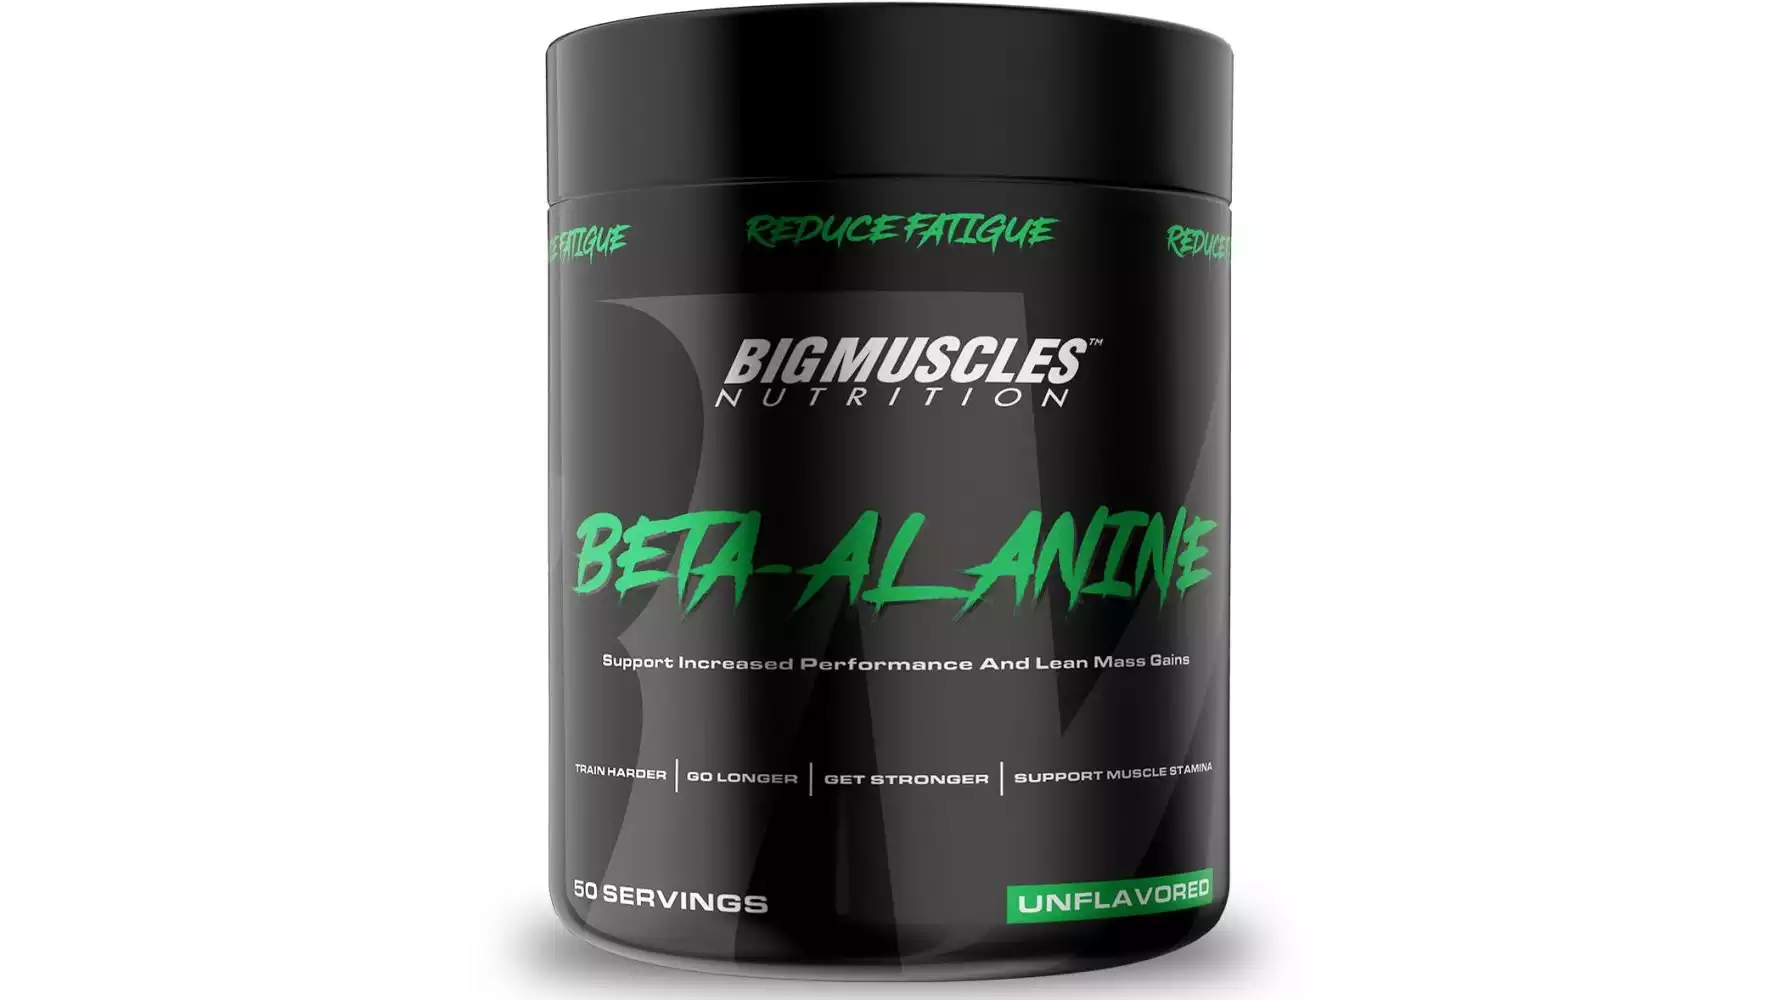 Bigmuscles Nutrition Beta Alanine Lean Mass Gainer Unflavored (100g)